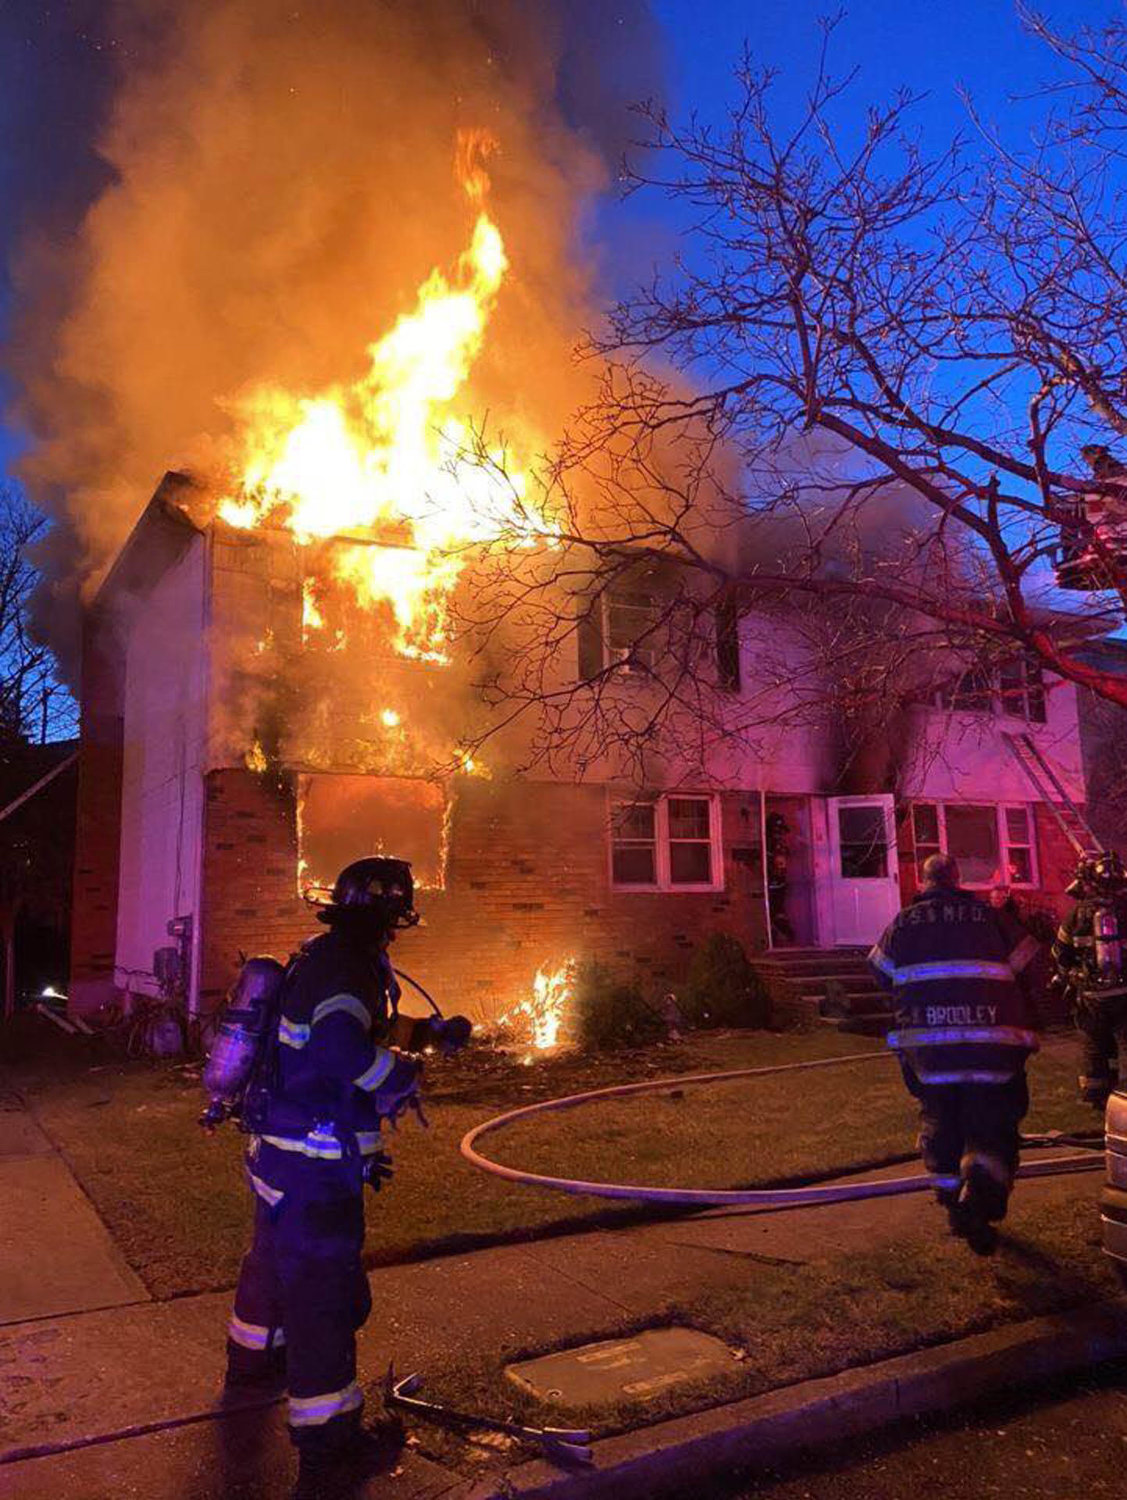 More than 100 firefighters fought the blaze on Dec. 23.